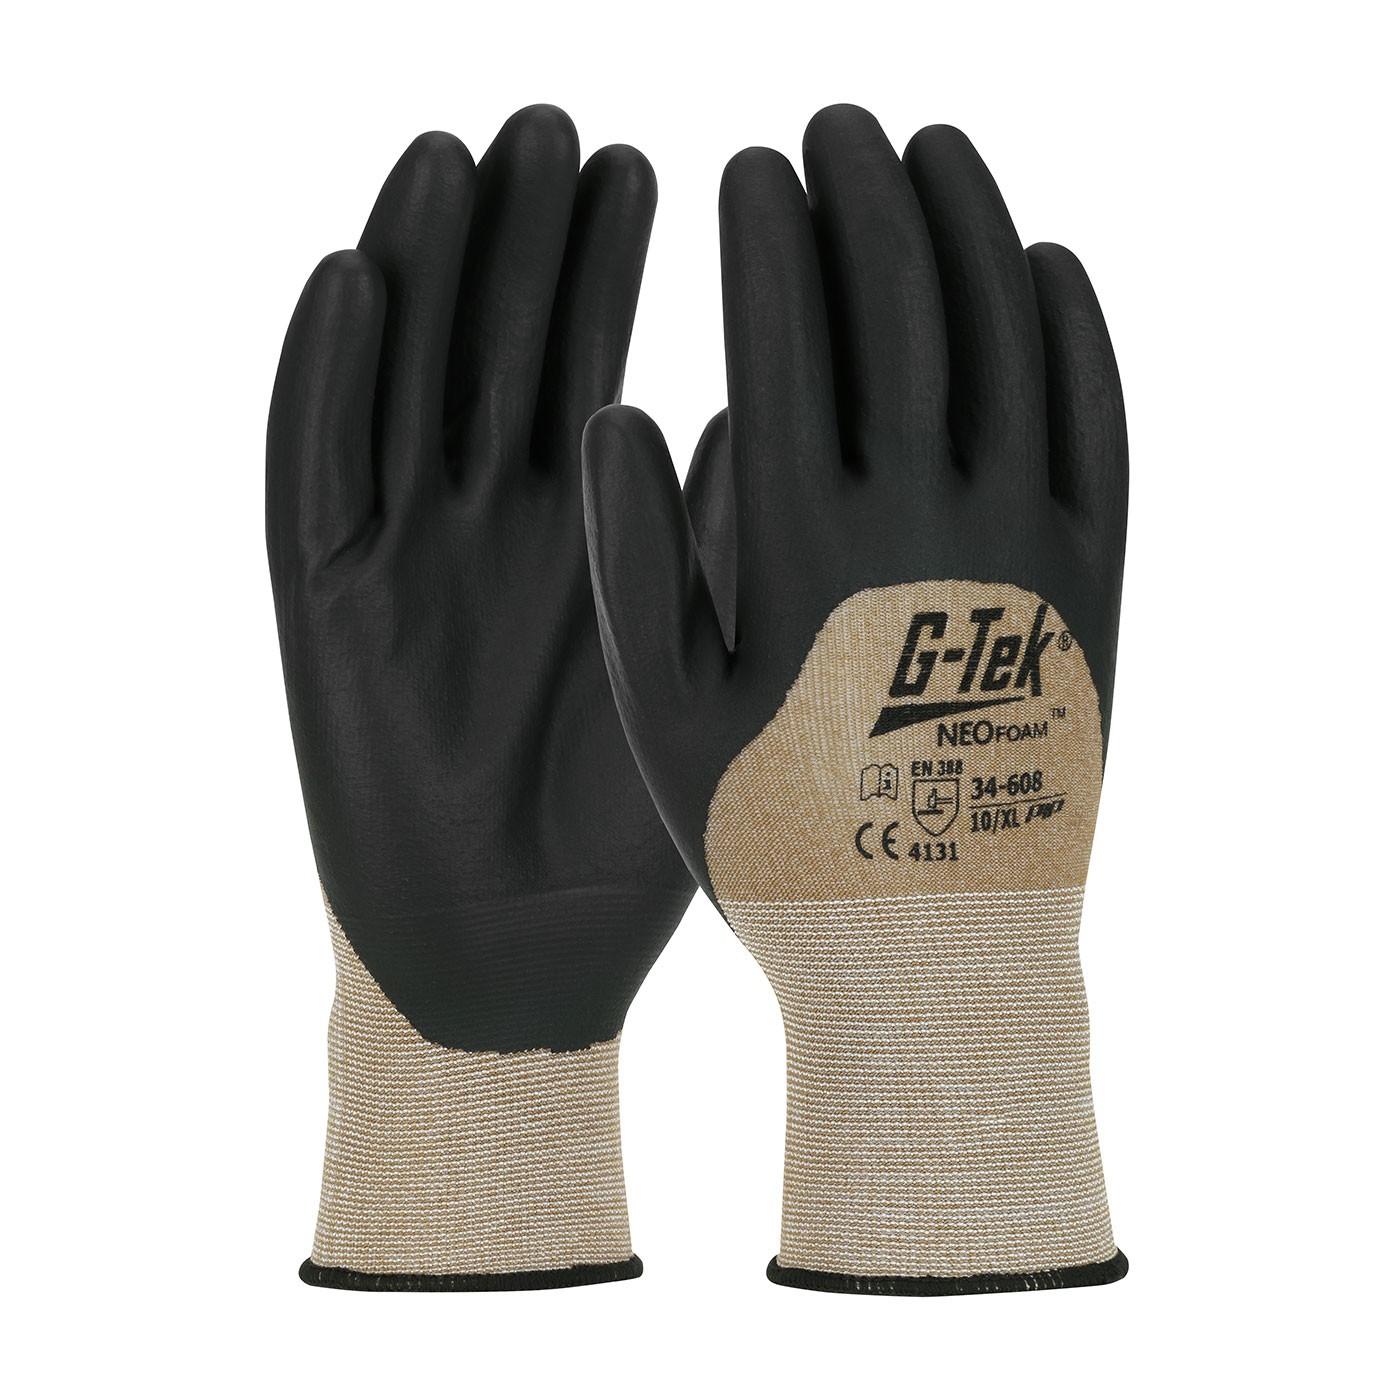 G-Tek® NeoFoam® Seamless Nylon Glove with NeoFoam® Coated Palm, Fingers & Knuckles - Touchscreen Compatible (#34-608)